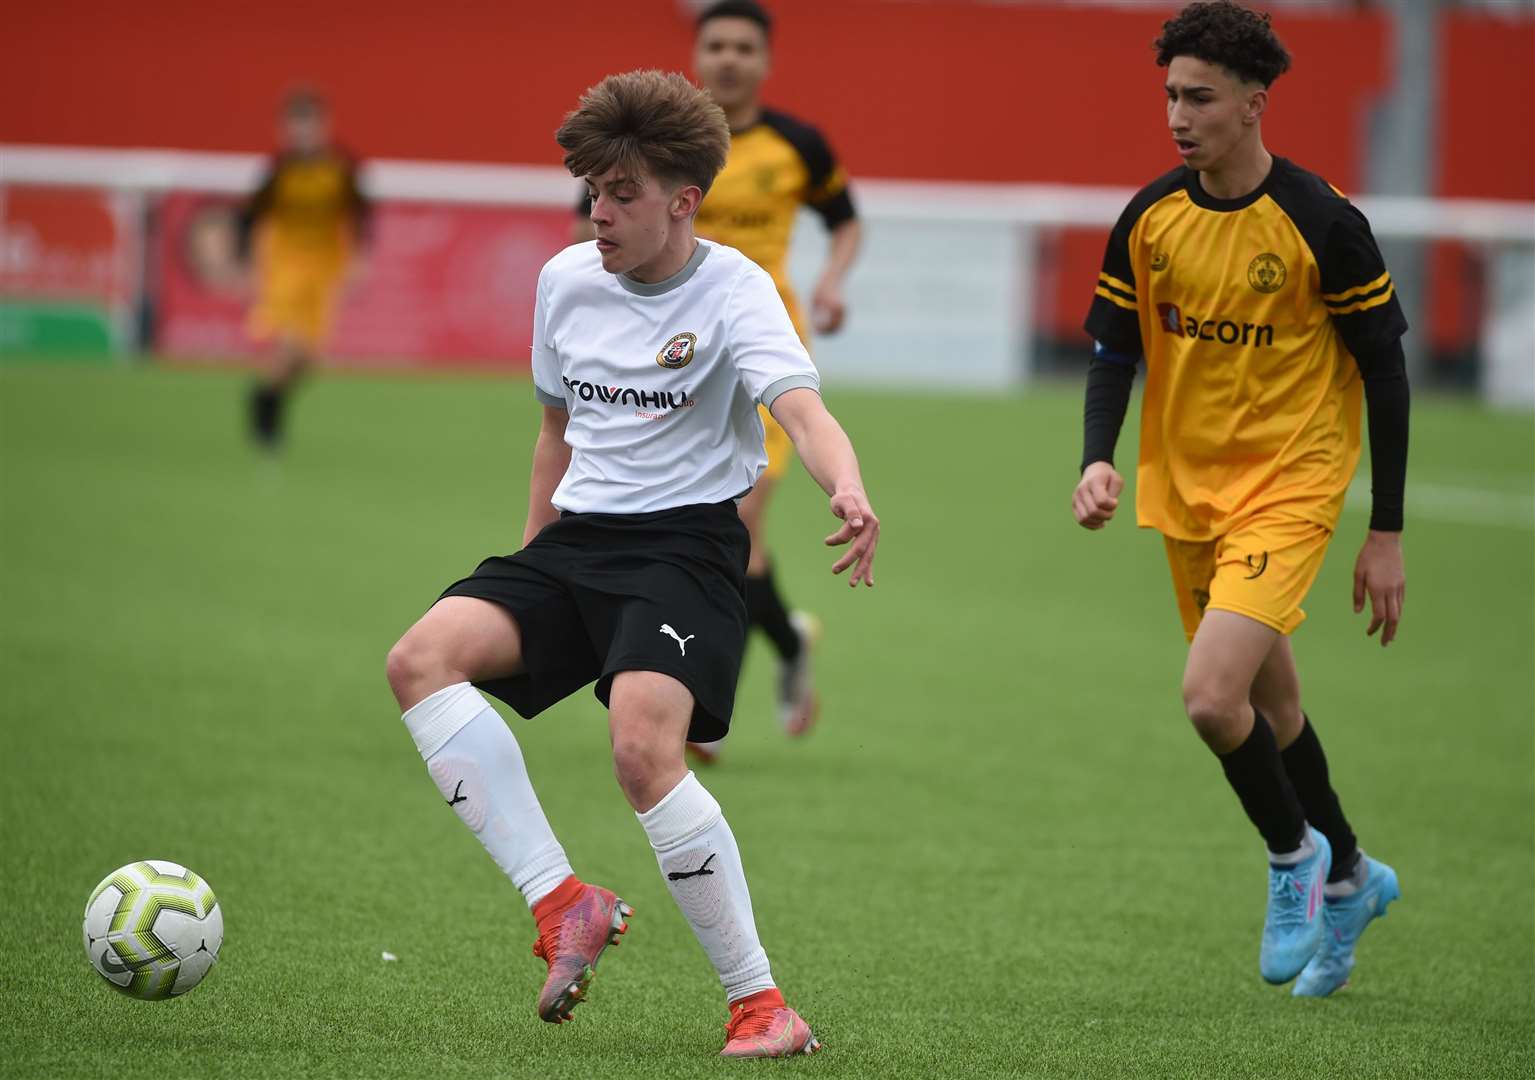 Bromley on the ball during the Kent Merit Under-15 boys cup final against Cray Wanderers. Picture: PSP Images